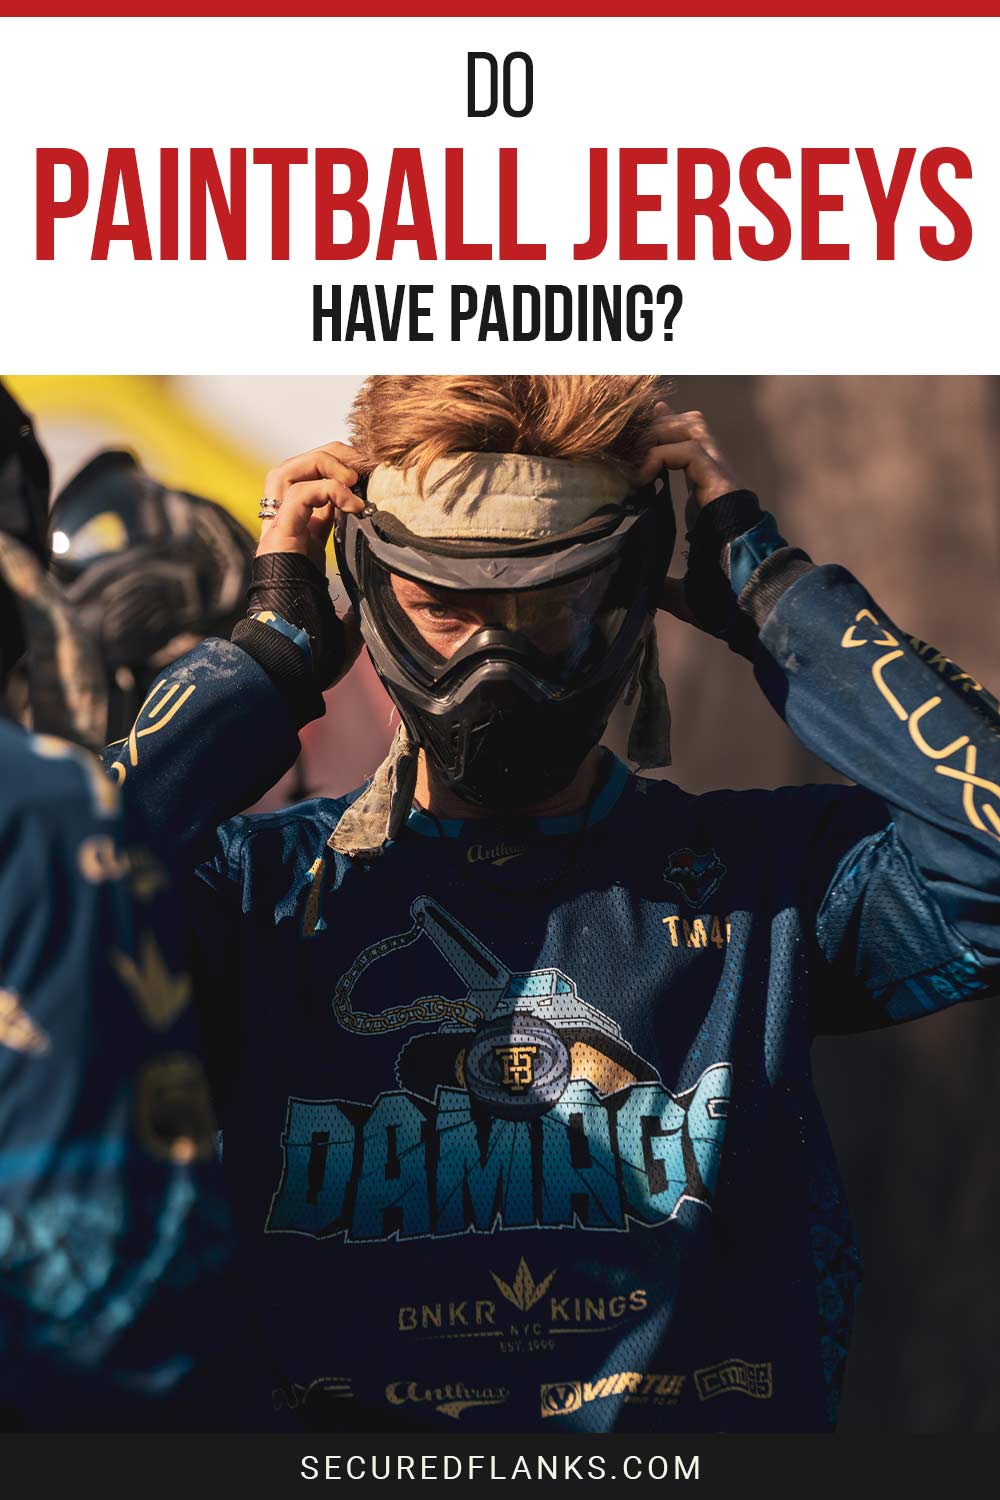 Person wearing a paintball jersey holding the helmet on head - do these jerseys have padding?